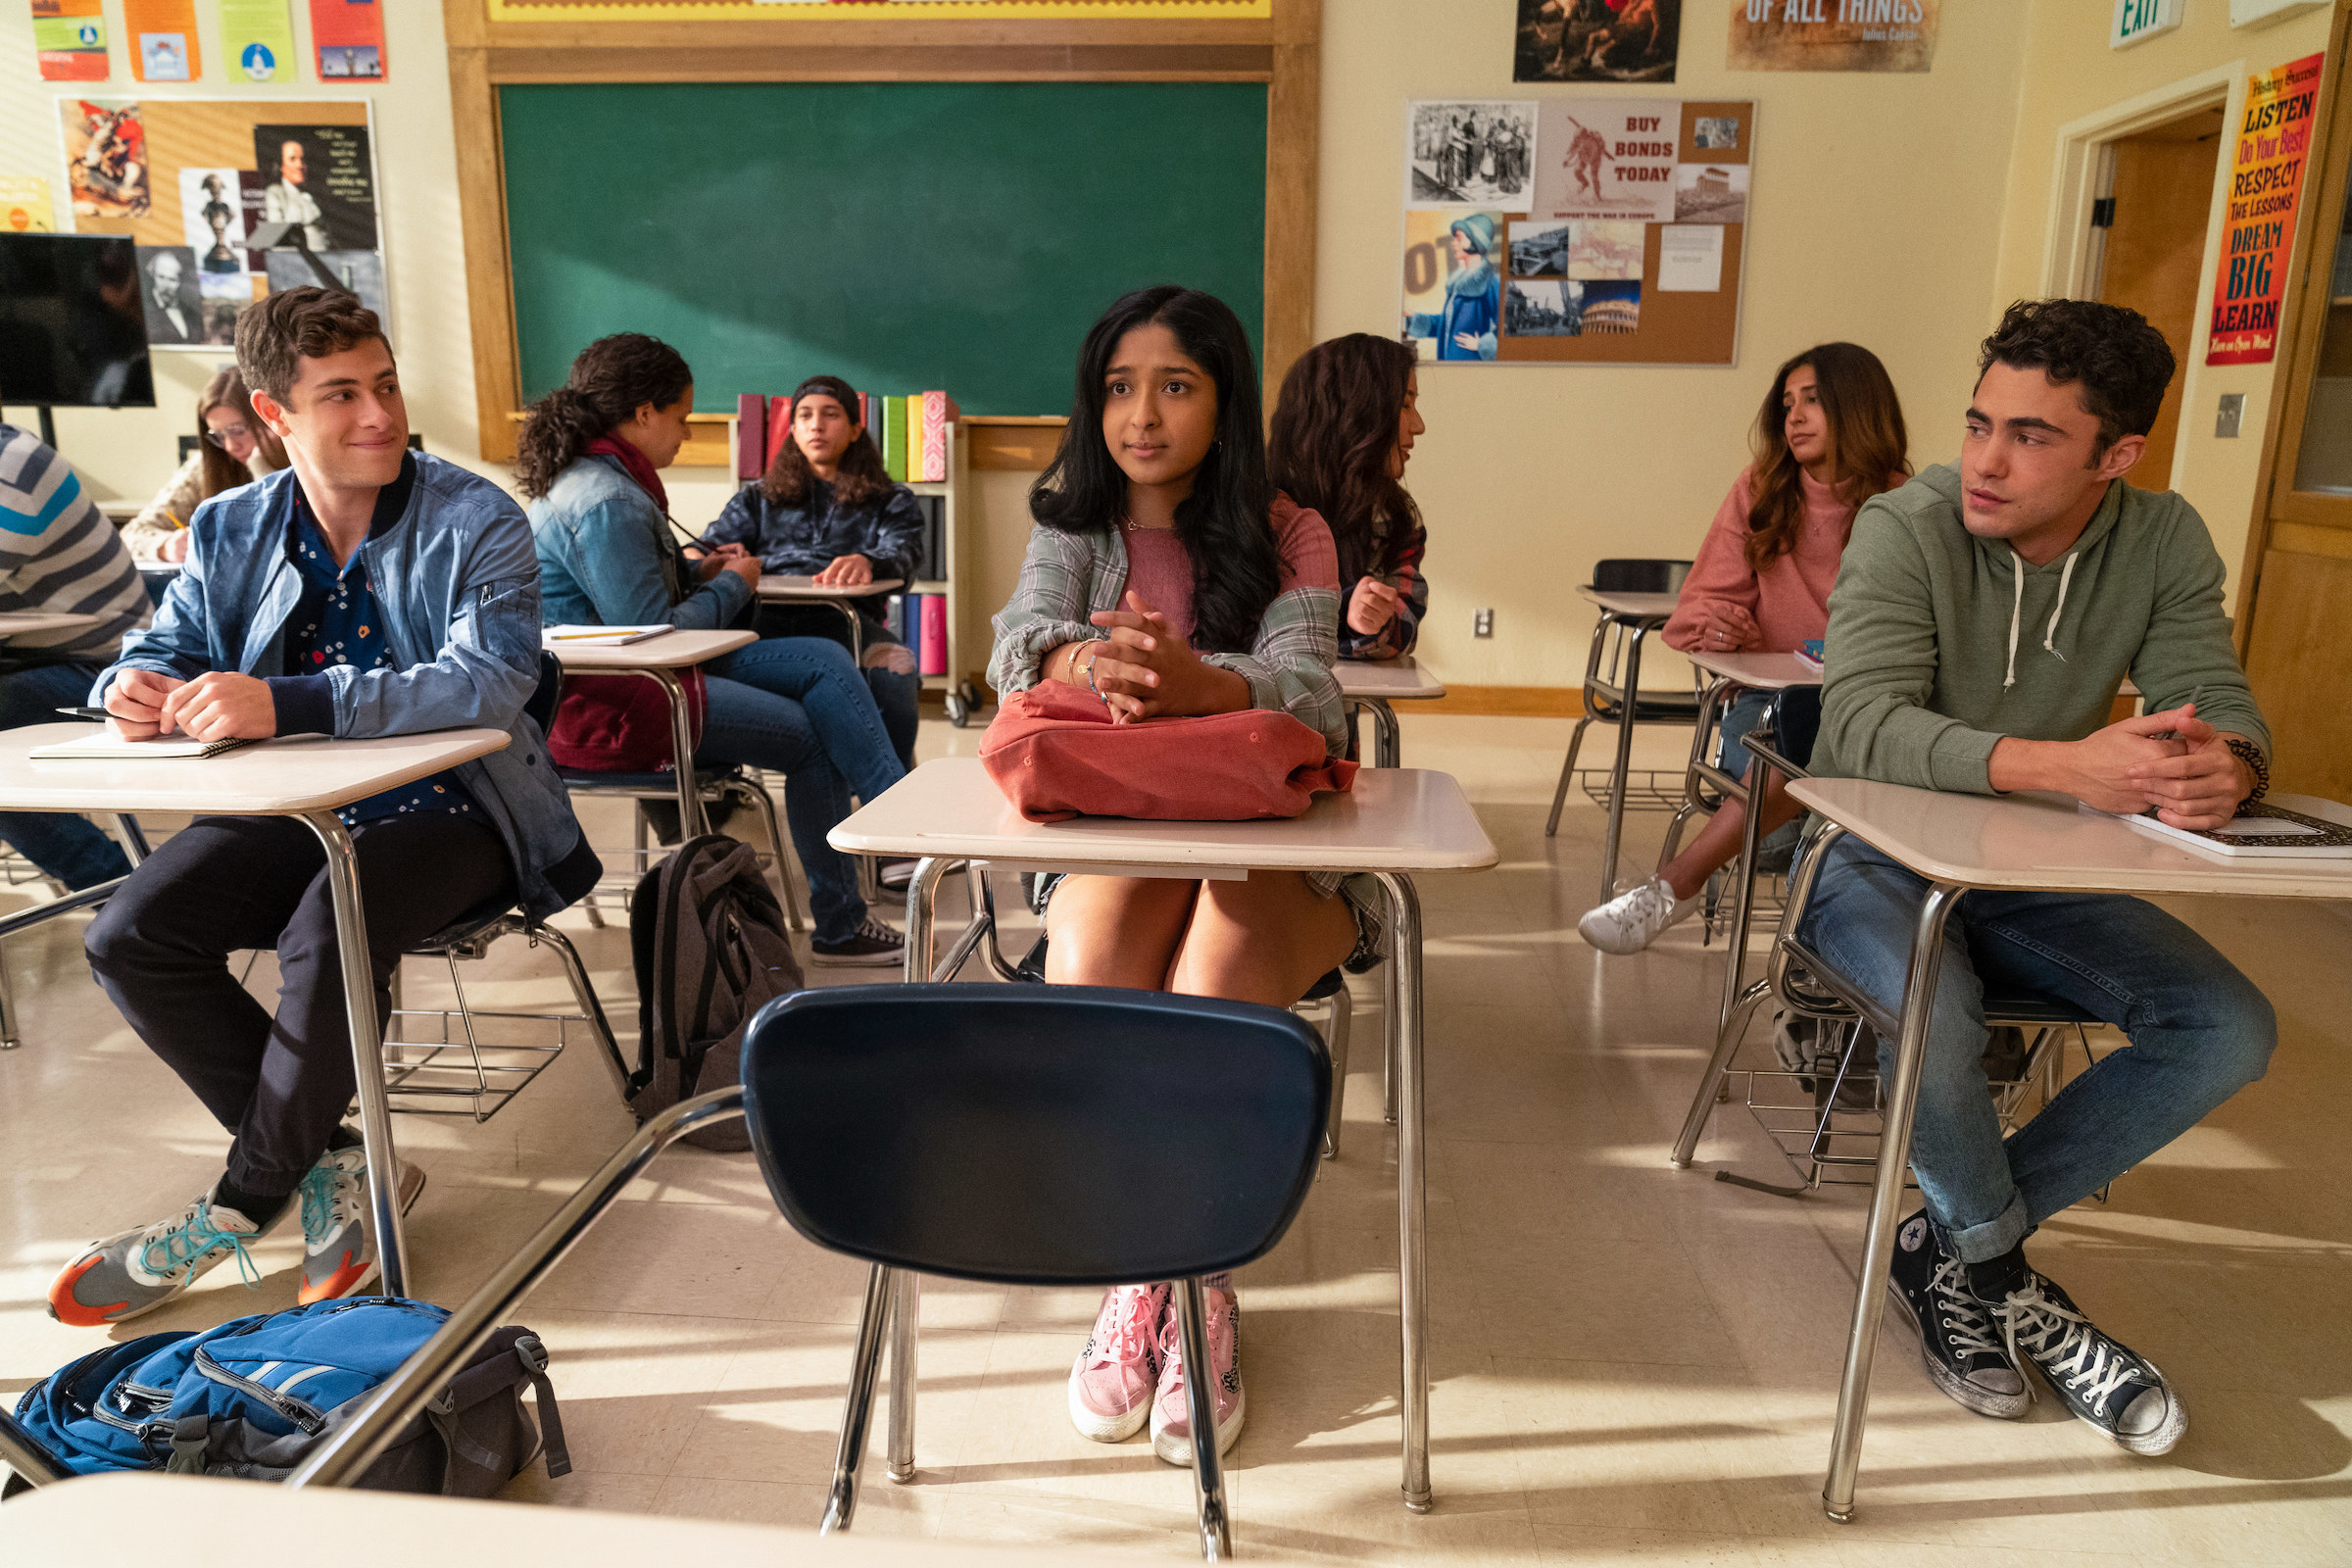 Devi sitting at her desk in class while her classmates sit around her